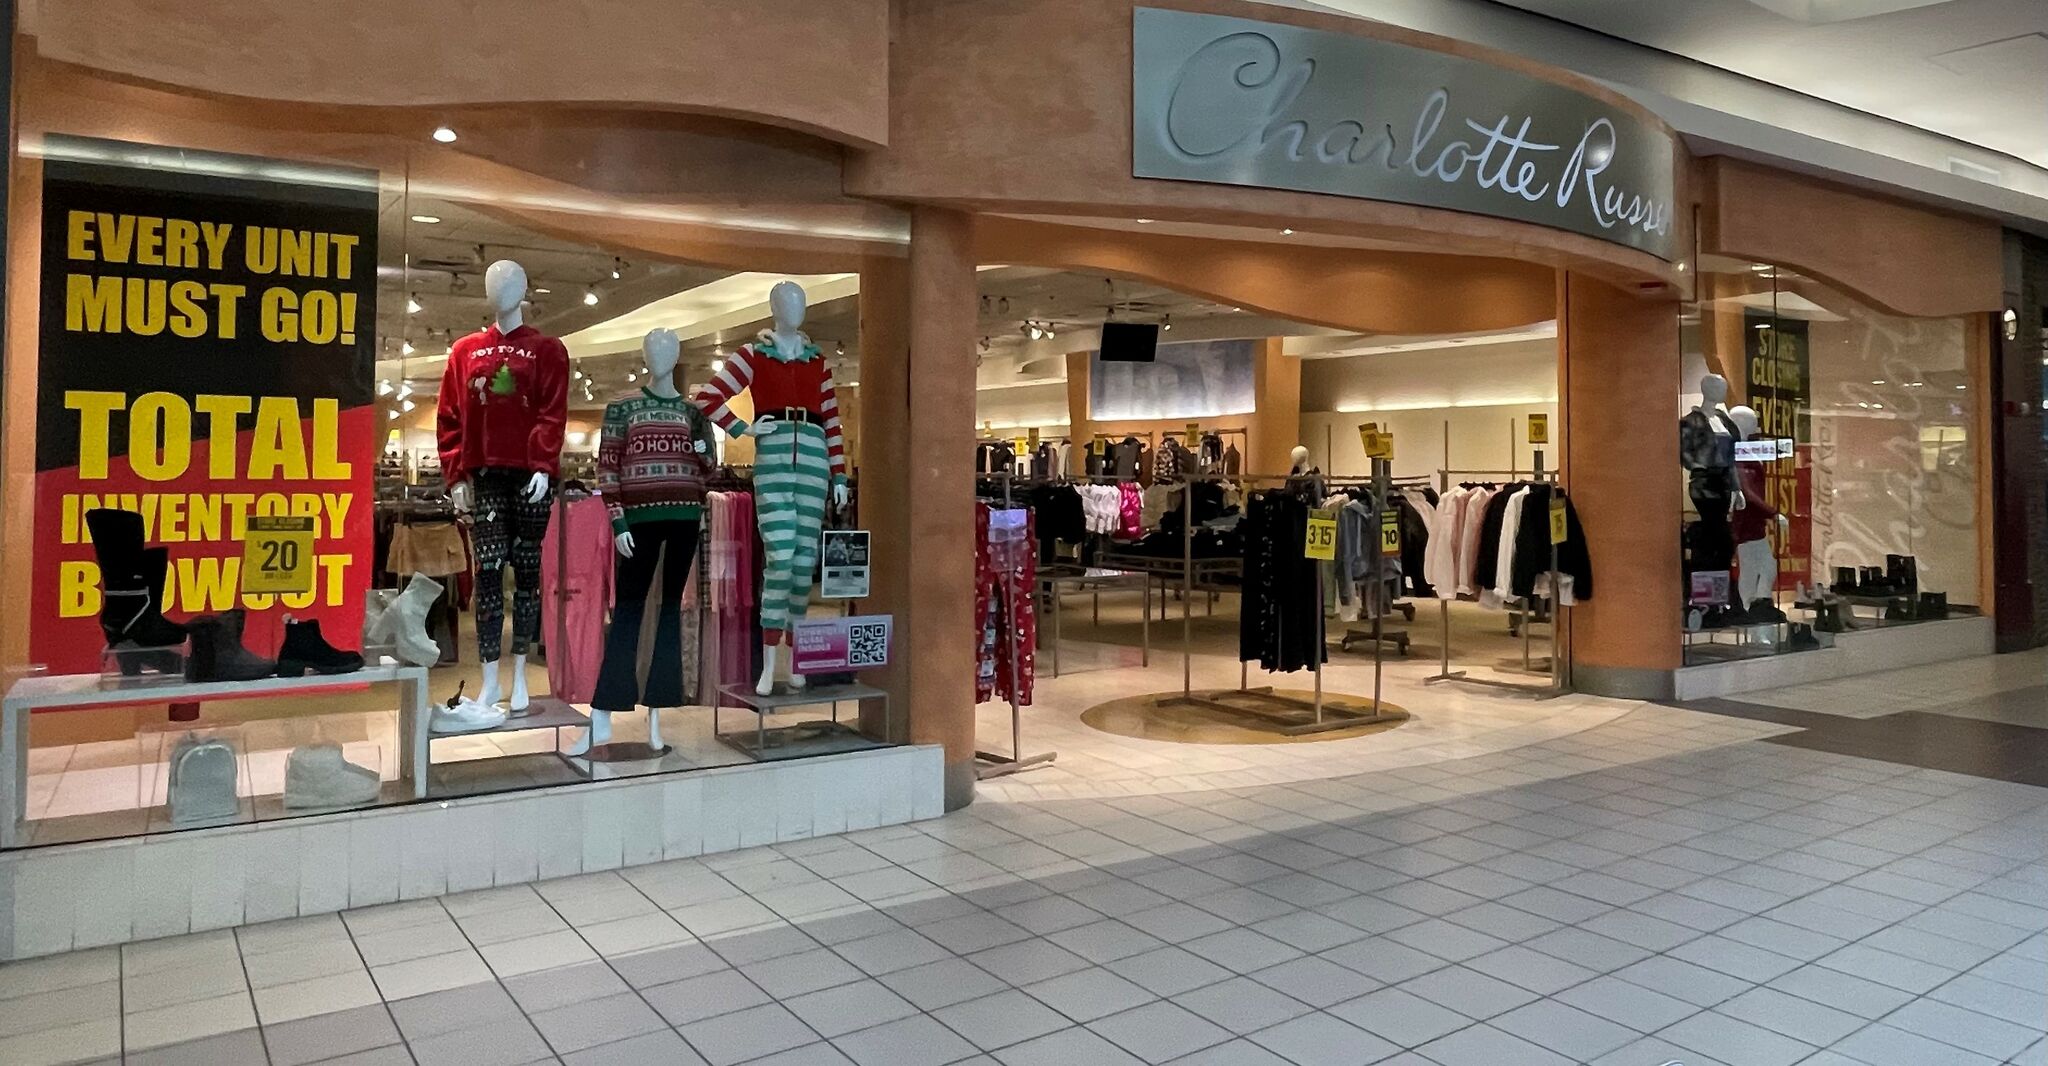 Fashion brand Charlotte Russe to close store in CT, open another